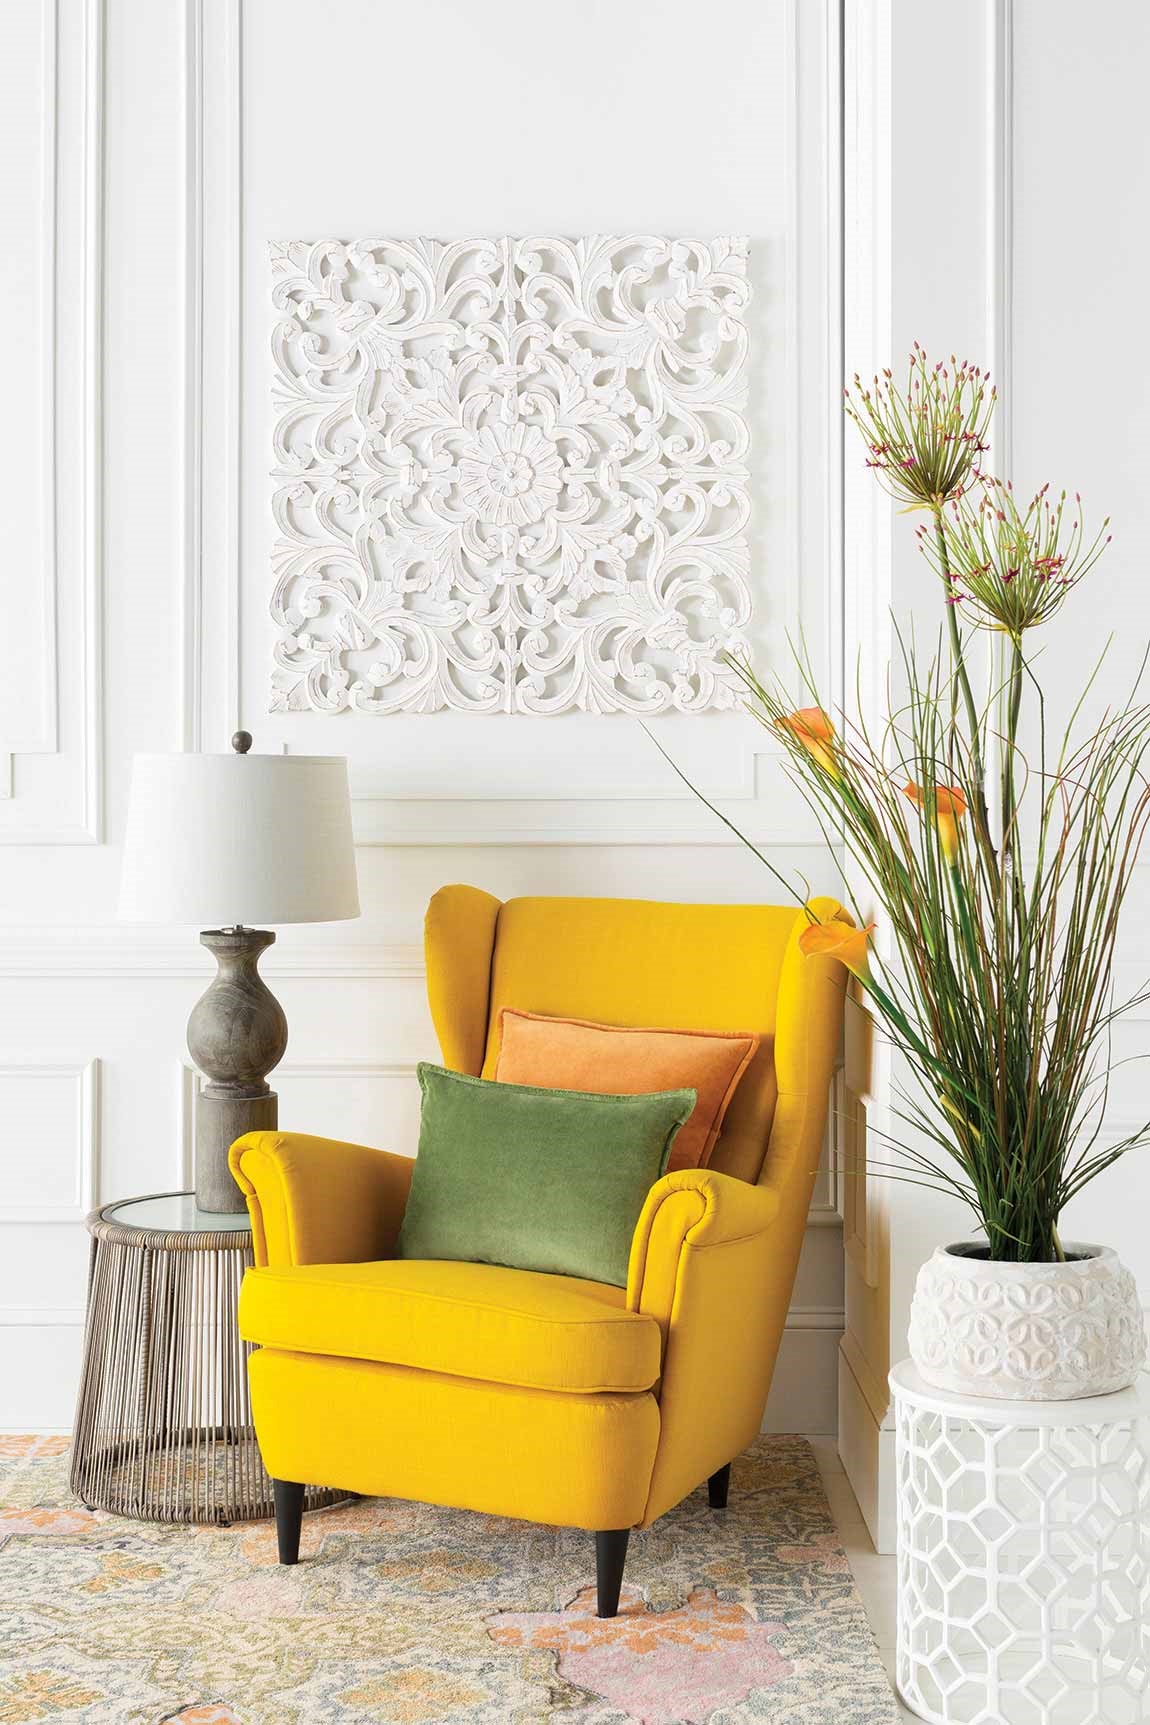 light colored room corner with yellow chair